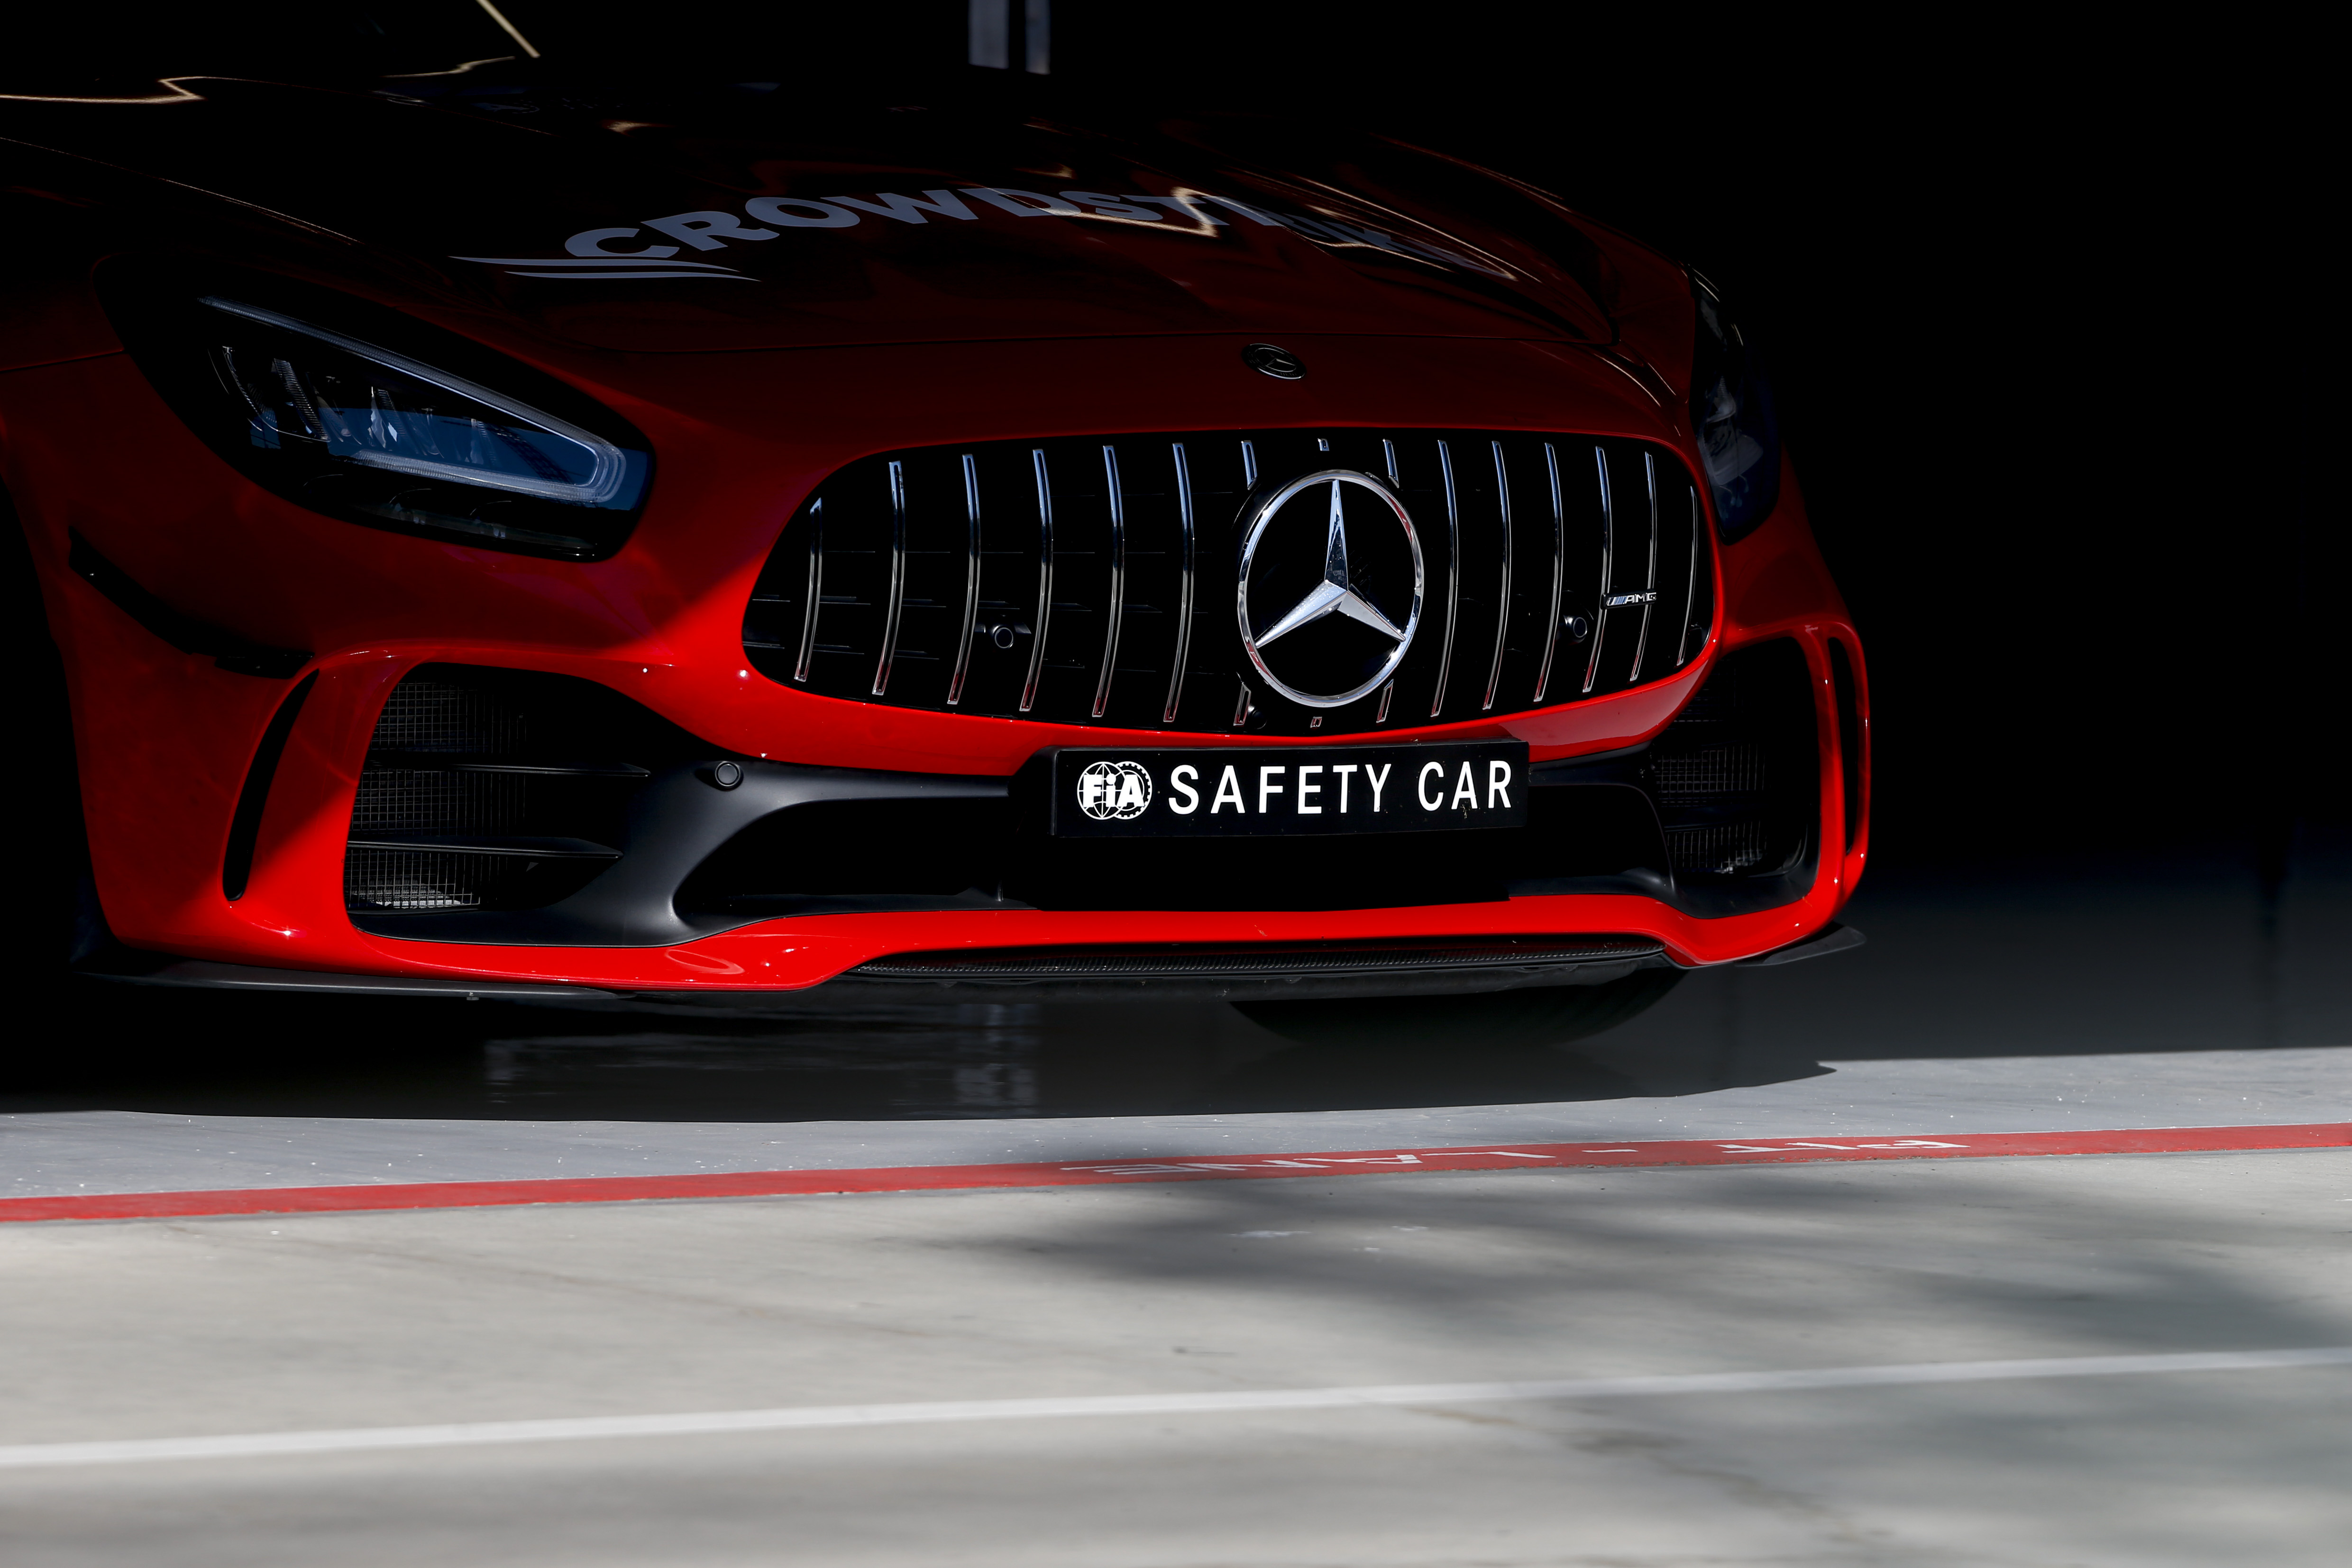 Ever wondered about the F1 safety car? We talk to its driver | Ars Technica